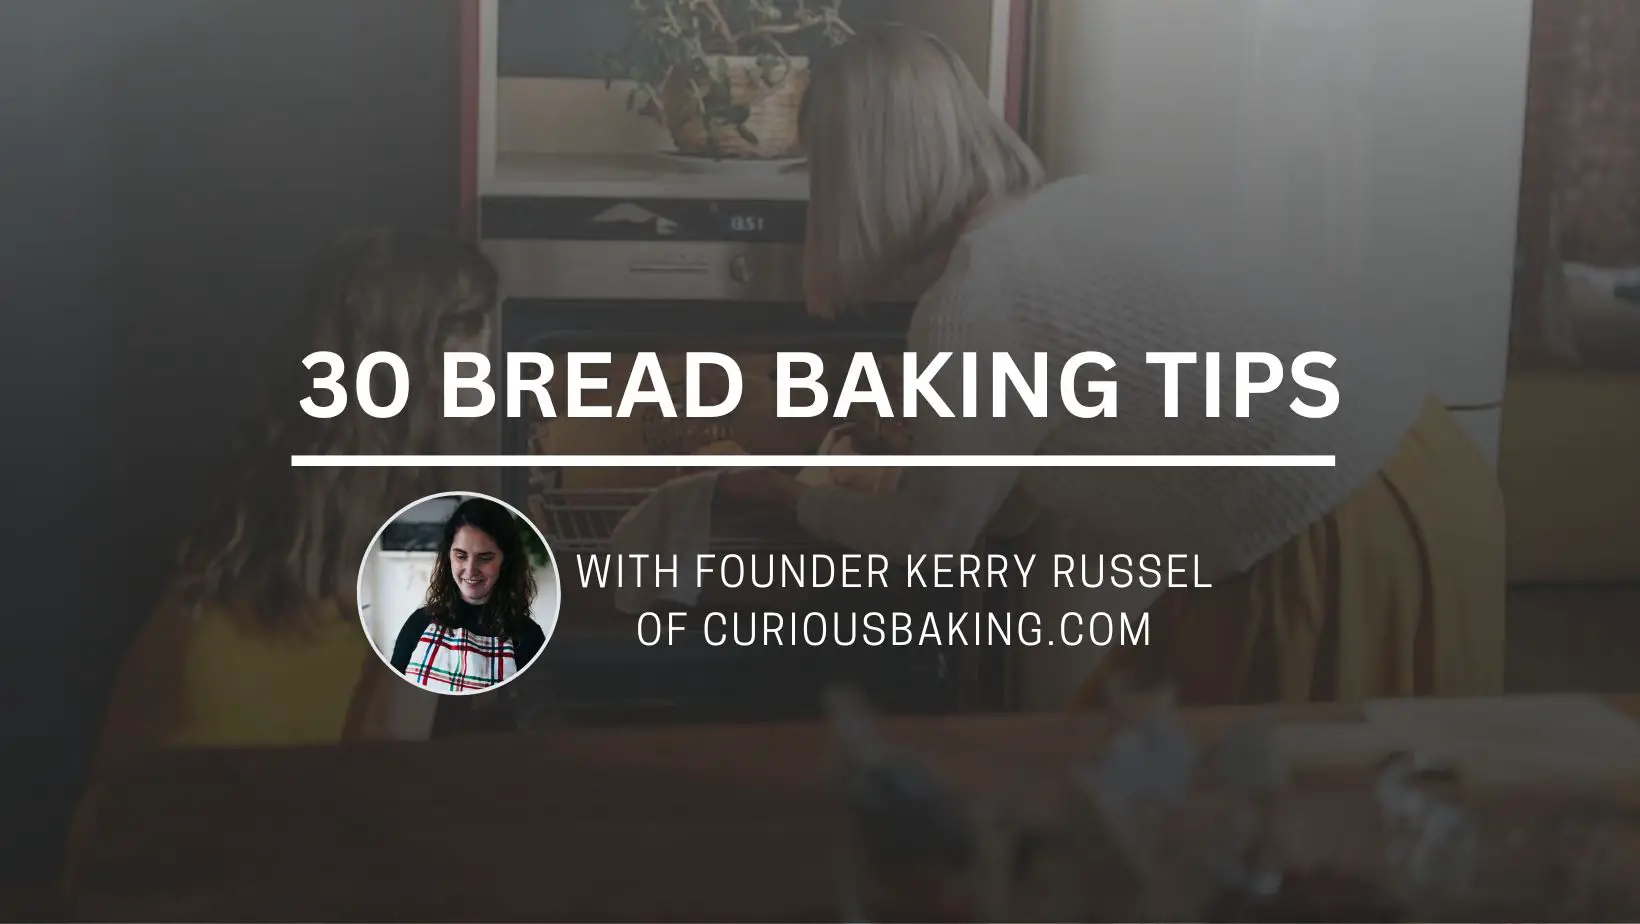 30 Bread Baking Tips by CuriousBaking.com